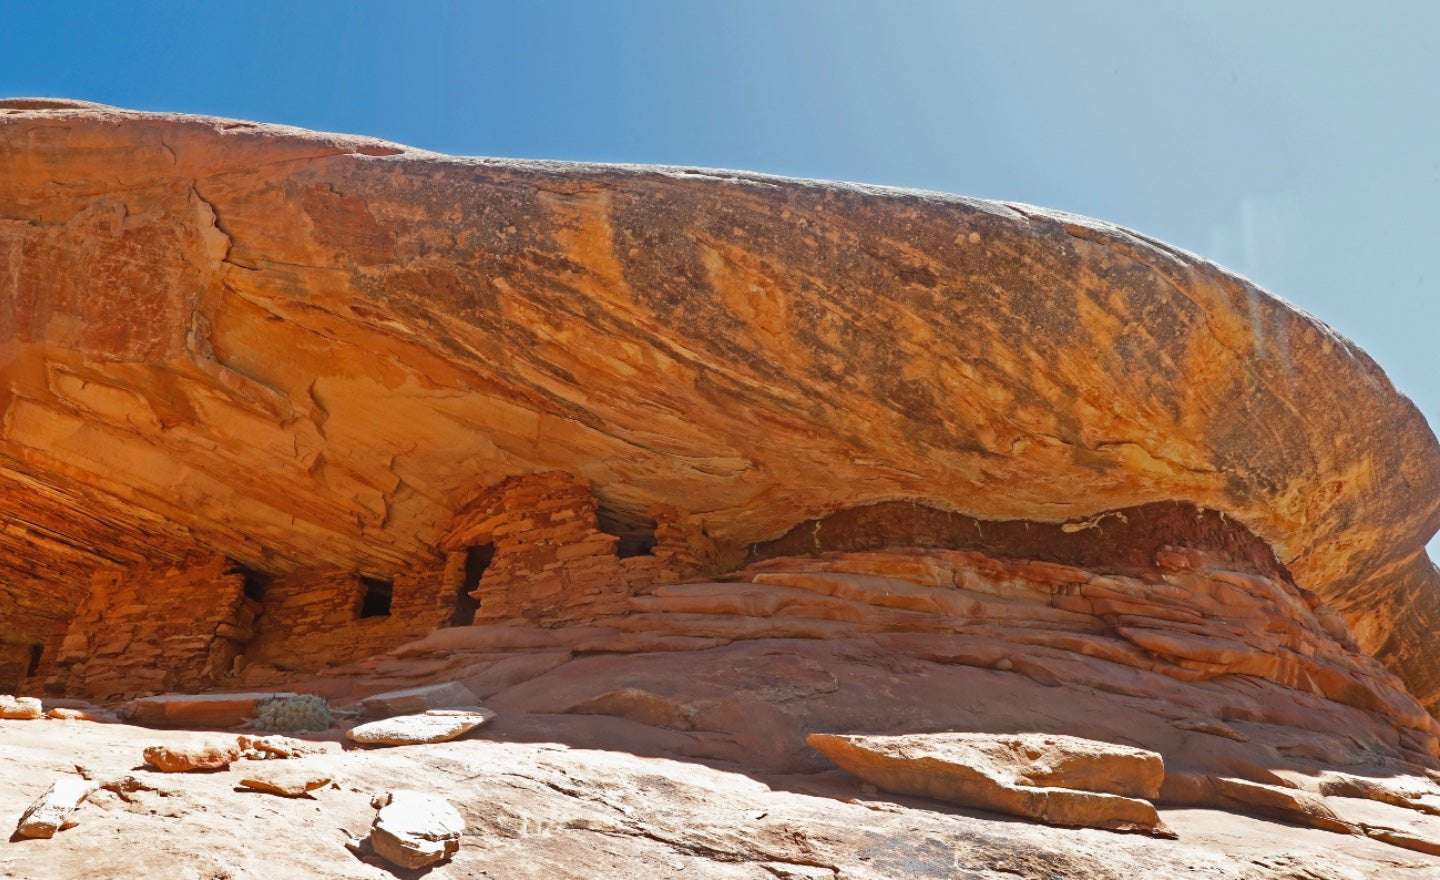 image for Environmental groups call for immediate restoration of national monuments shrunk by Trump